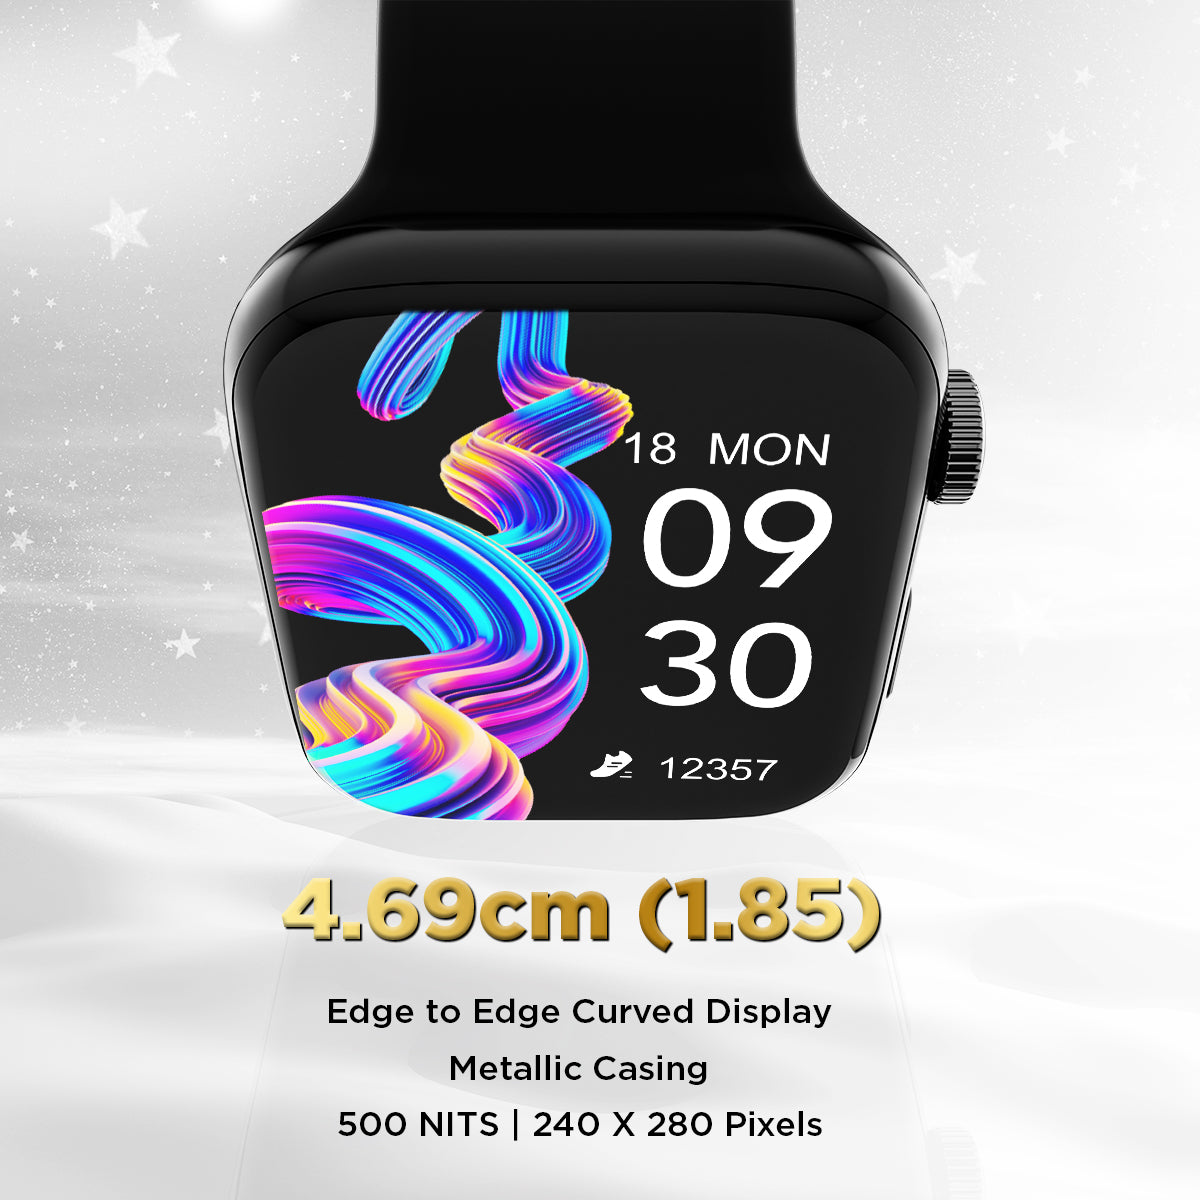 GIZMORE Star 1.85 IPS Large Display with Rotating Crown Controls| AI Voice Assistant | Bluetooth Calling Smartwatch